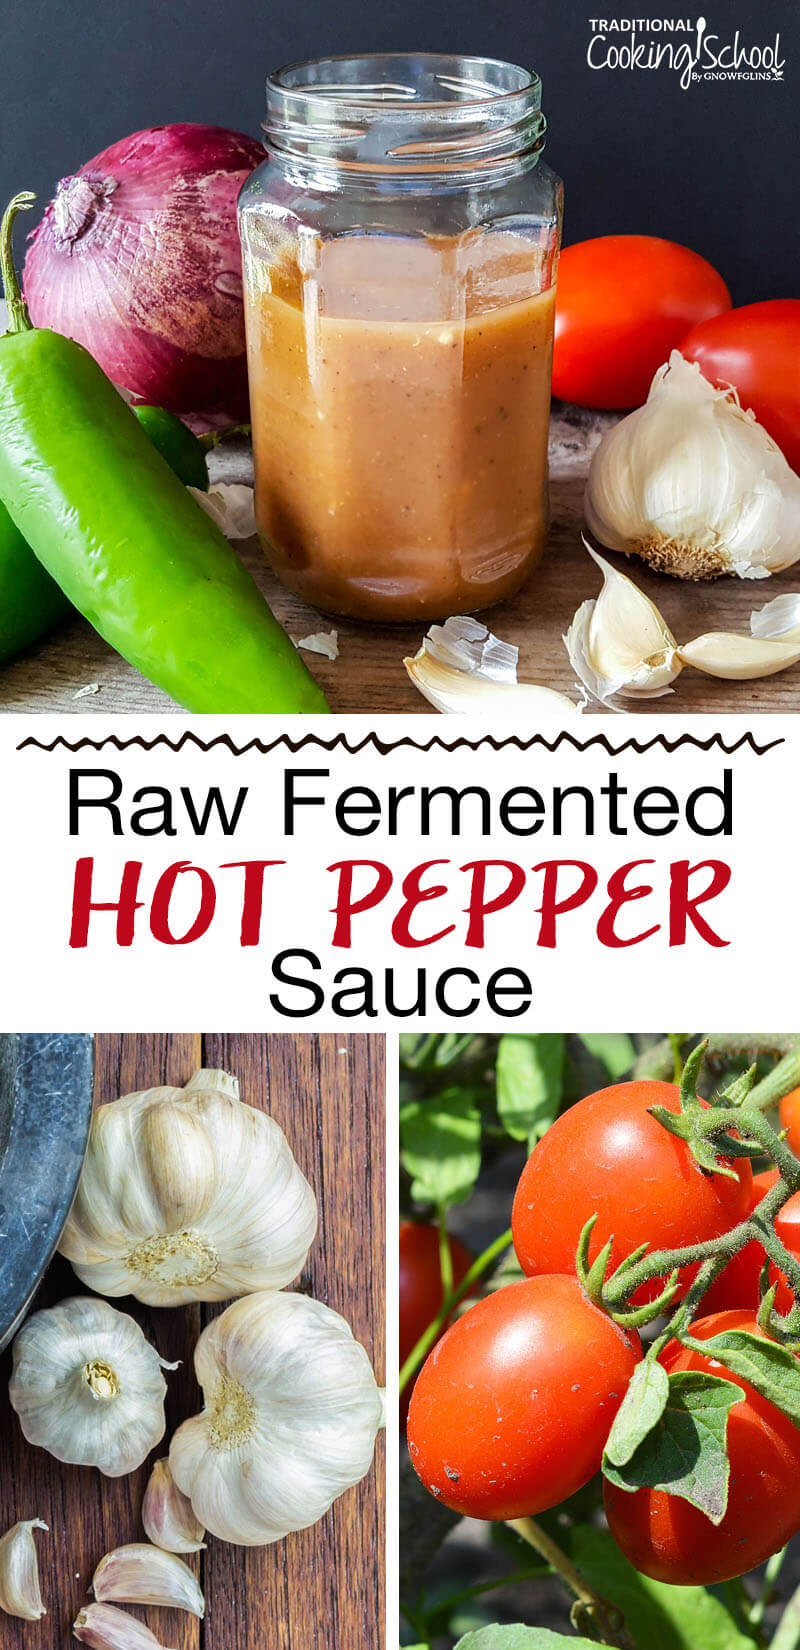 Photo collage of tomatoes, garlic, and homemade hot sauce in a small jar surrounded by garlic, hot peppers, onion, and tomatoes. Text overlay says: "Raw Fermented Hot Pepper Sauce"